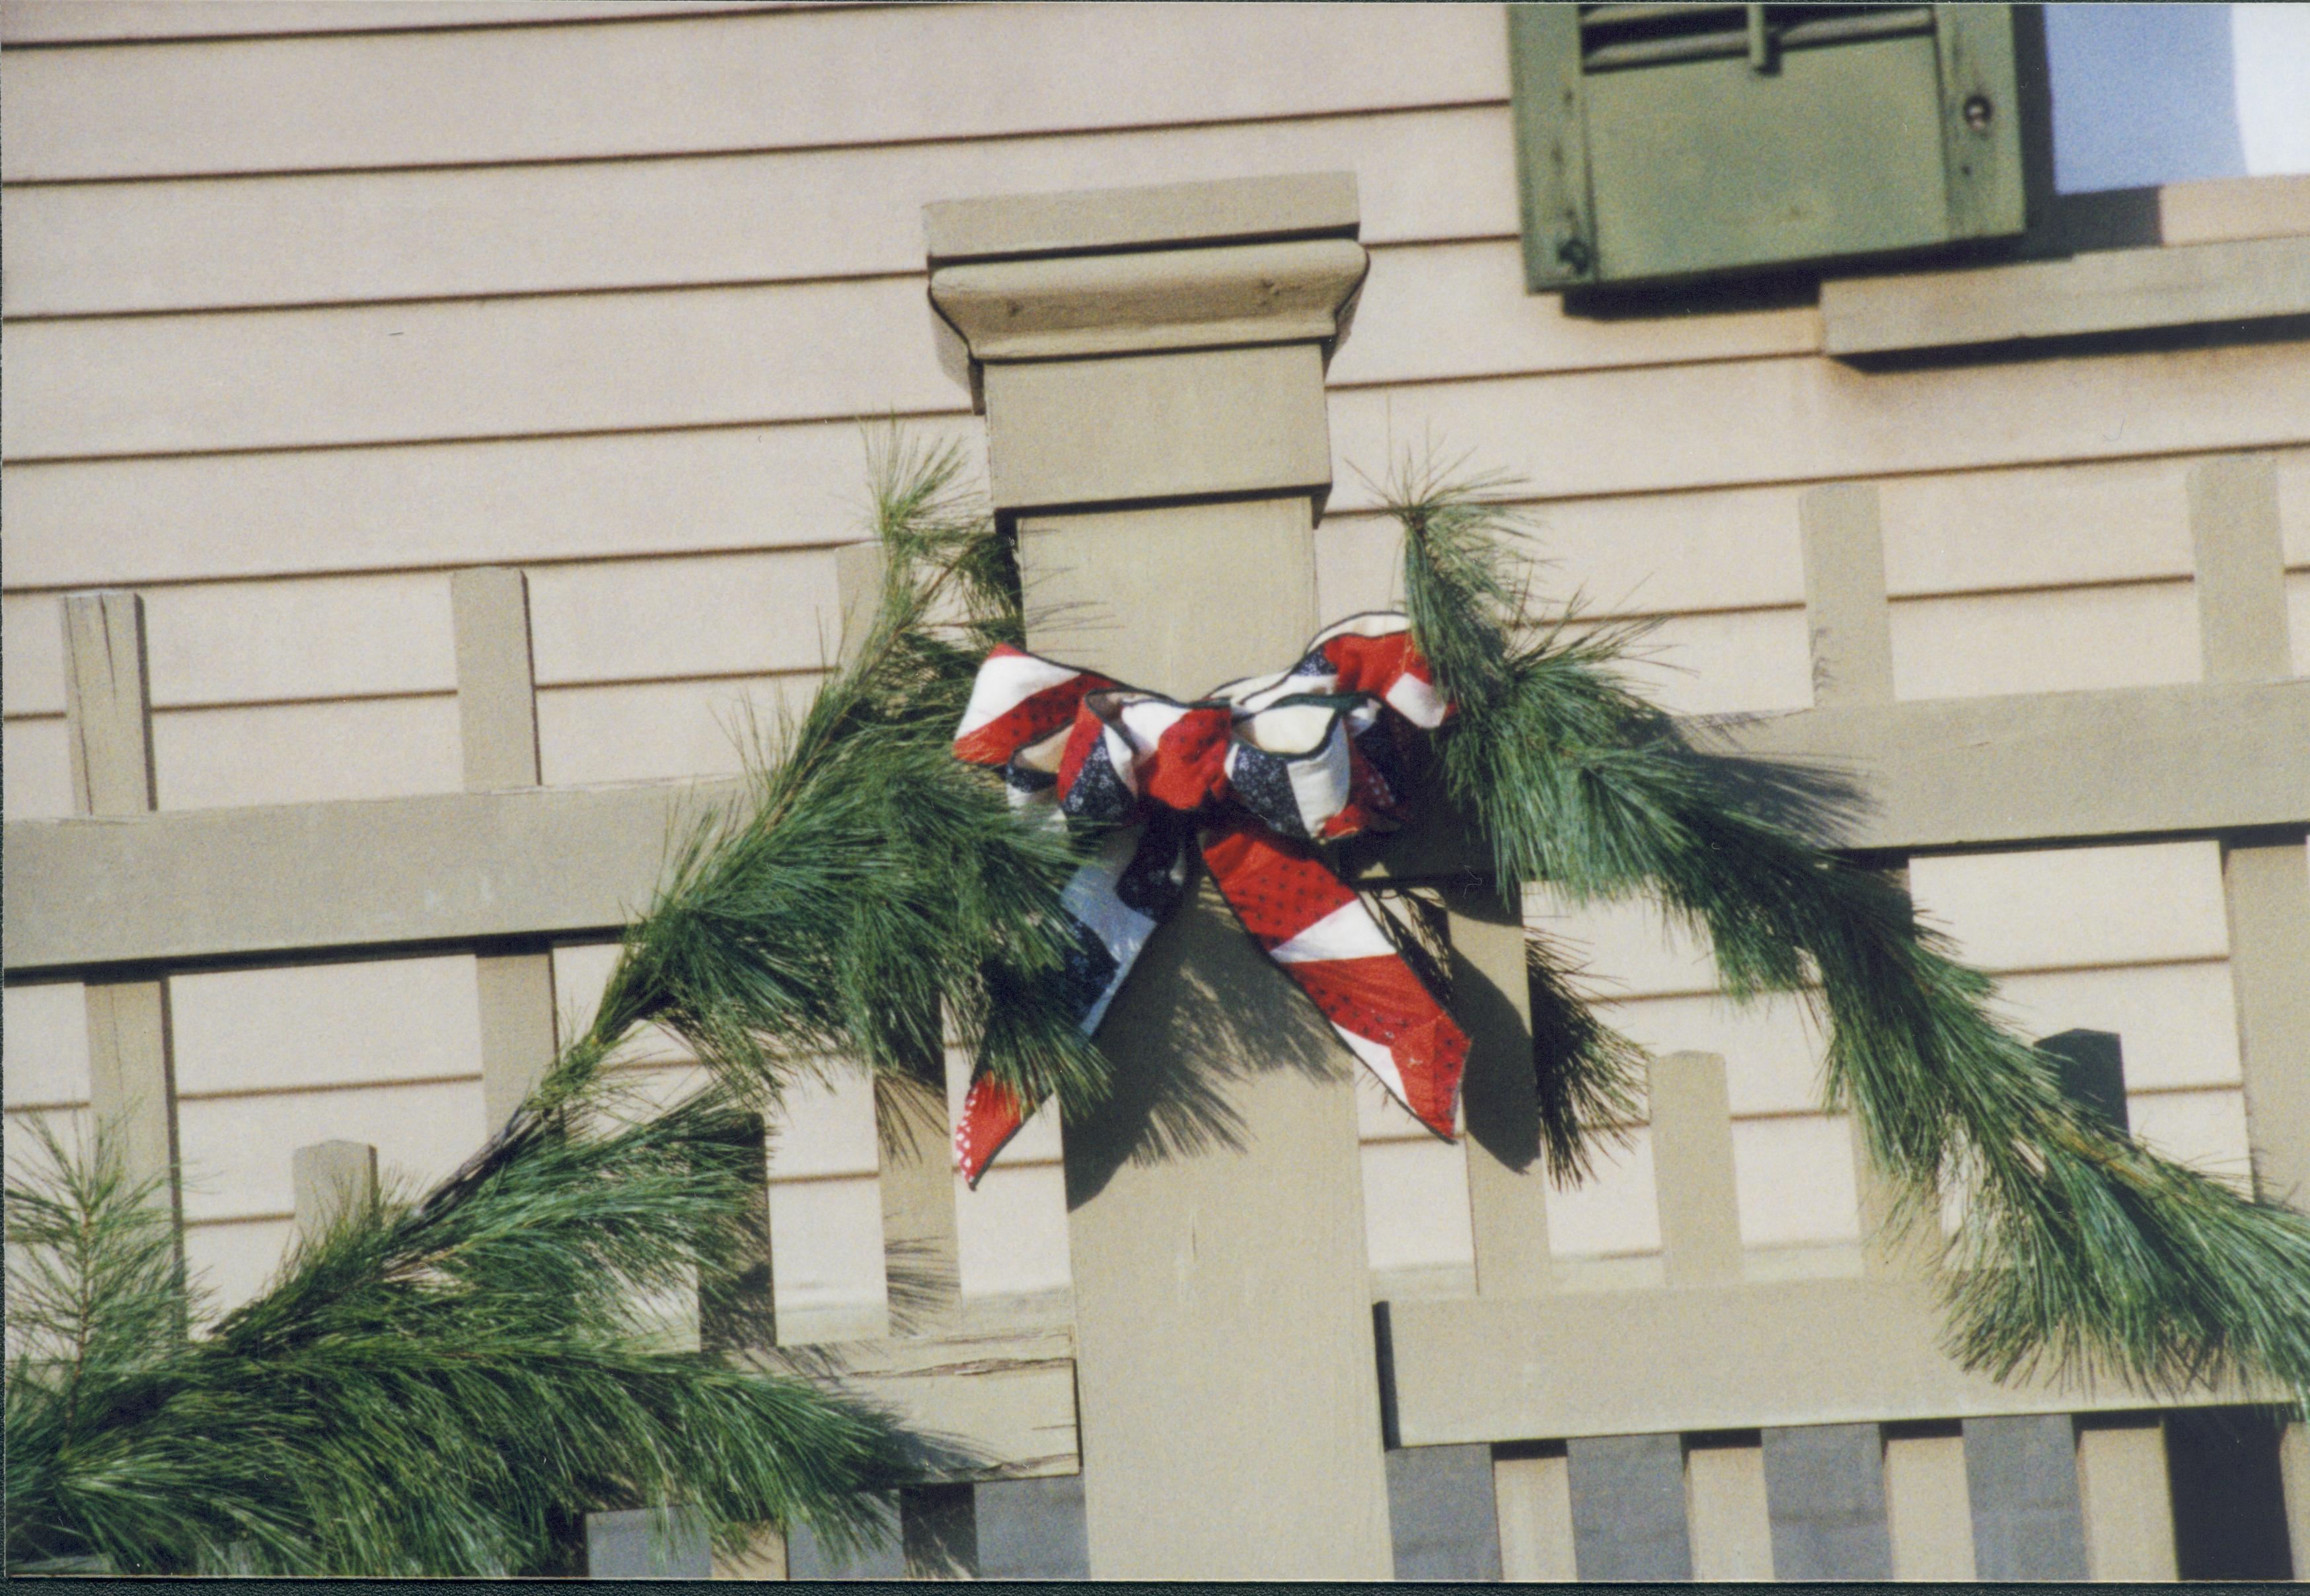 Christmas decorations on front fence post. Lincoln Home NHS- Christmas in Lincoln Neighborhood 2000, HS-01 2000-10 Christmas, decorations, neighborhood